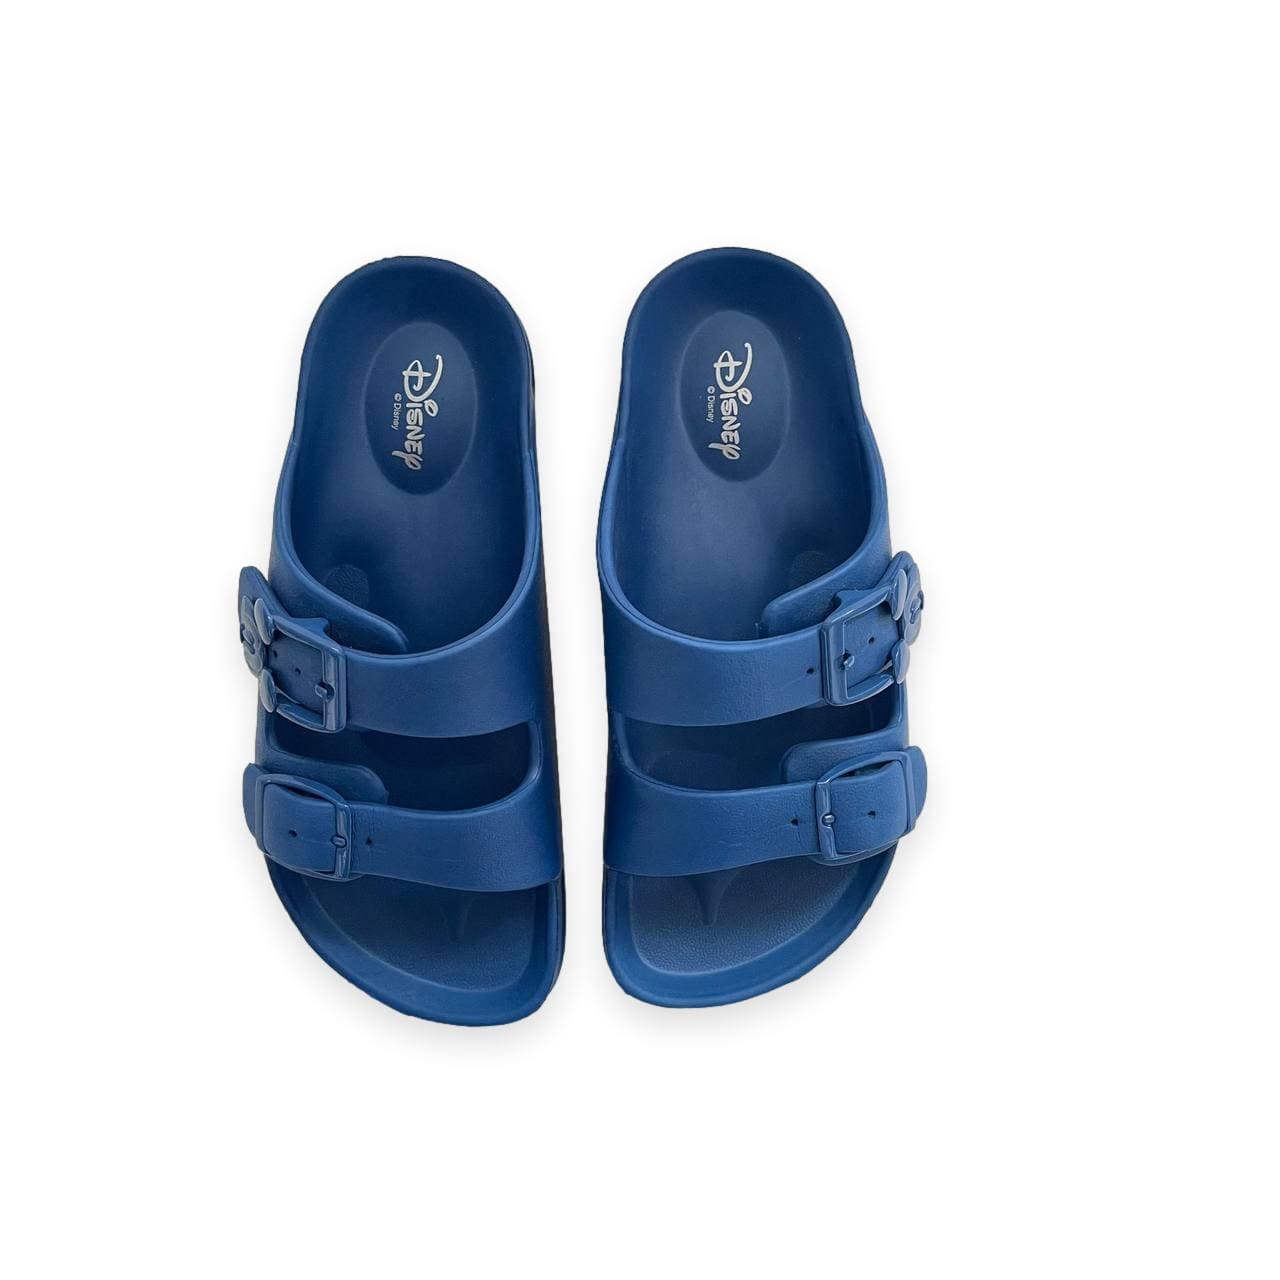 Mickey Mouse Slip On Sandals - Navy